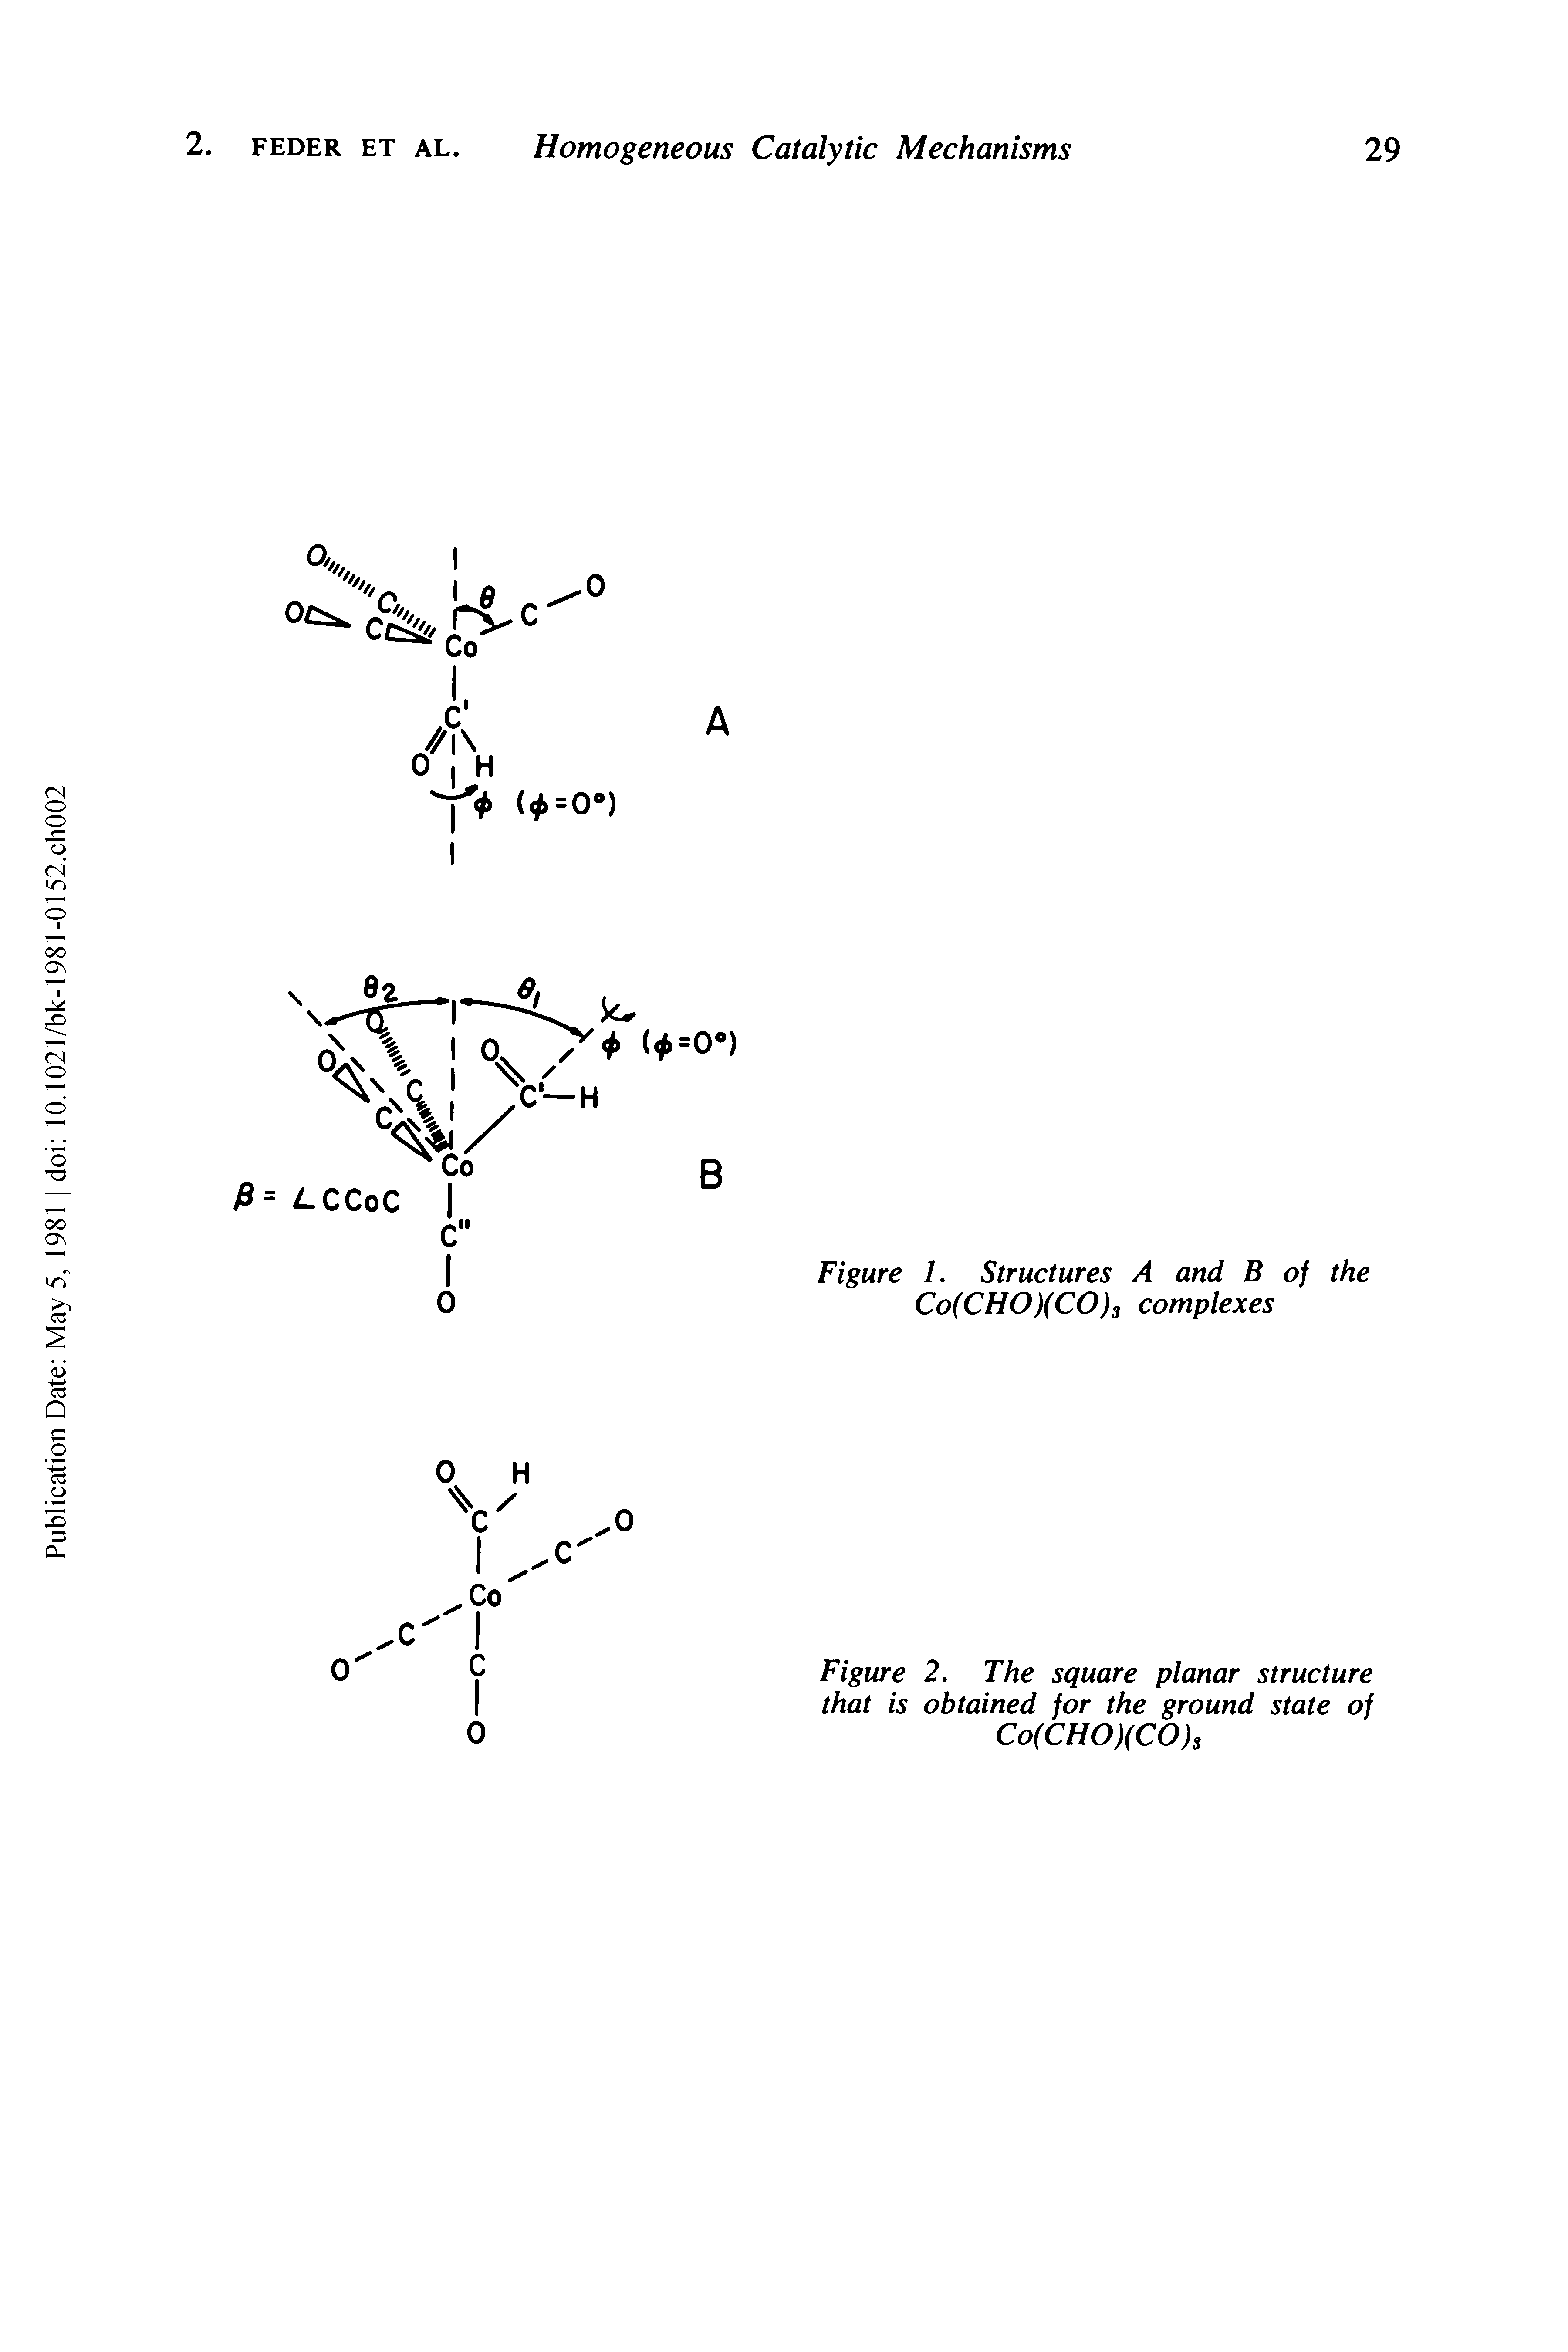 Figure 2. The square planar structure that is obtained for the ground state of...